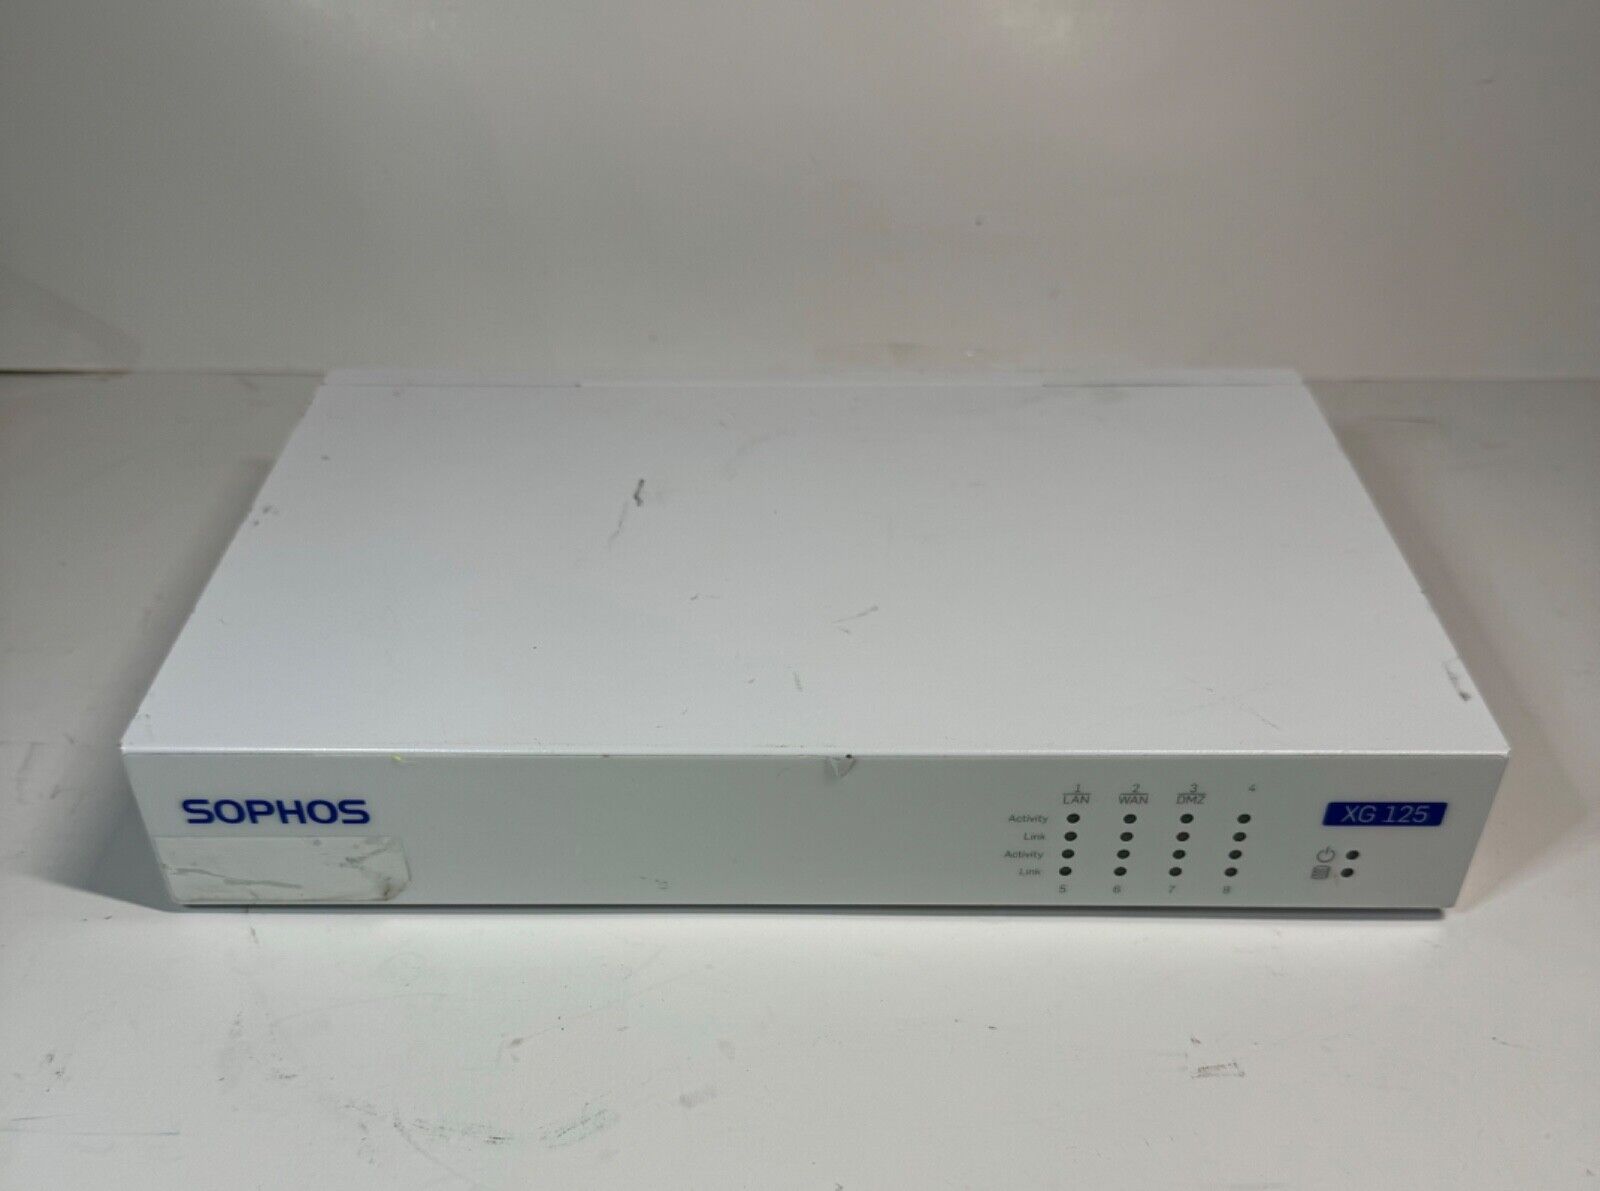 Sophos XG 125 Rev. 2 Firewall Security Appliance with generic Power Cord